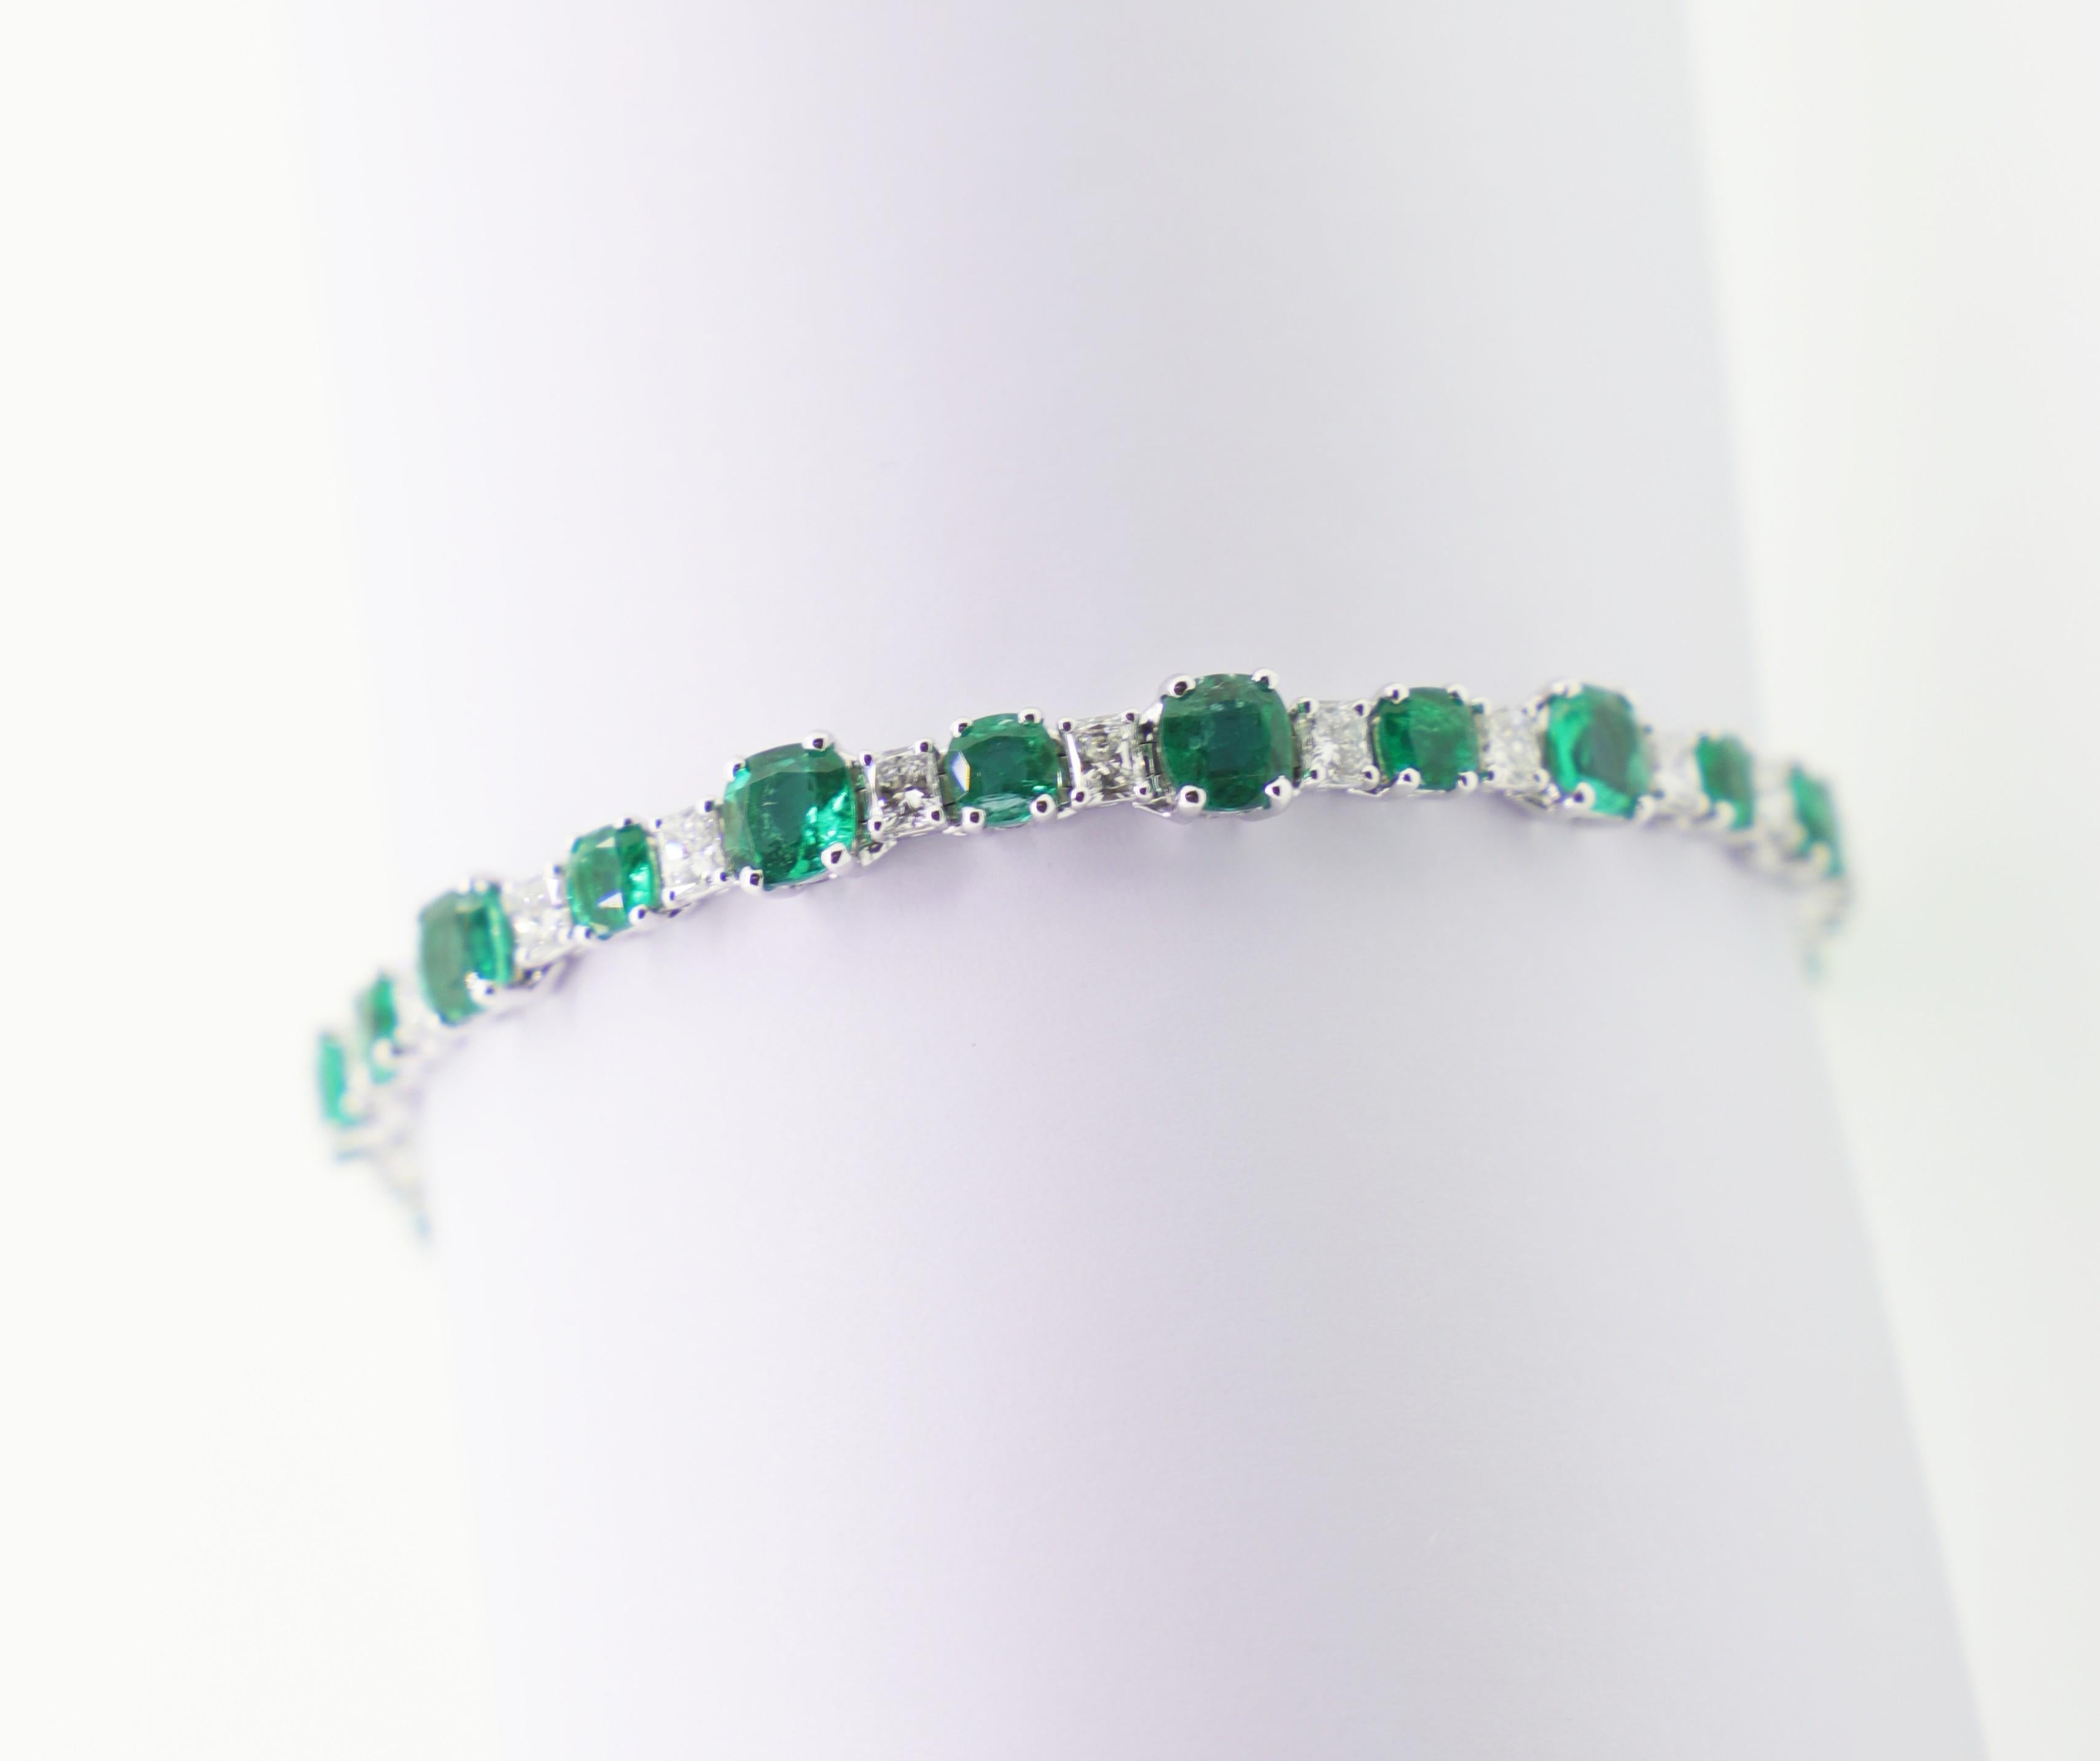 Elegant and Essential Tennis Bracelet featuring  24 Vibrant Green Cushion Shape Emeralds, for 9.30 Carat Total, spaced out by 24 White Radiant Shape Diamonds, for 3.21 Carat Total.
Traditionally, Emerald Stones are believed to benefit the wearer by